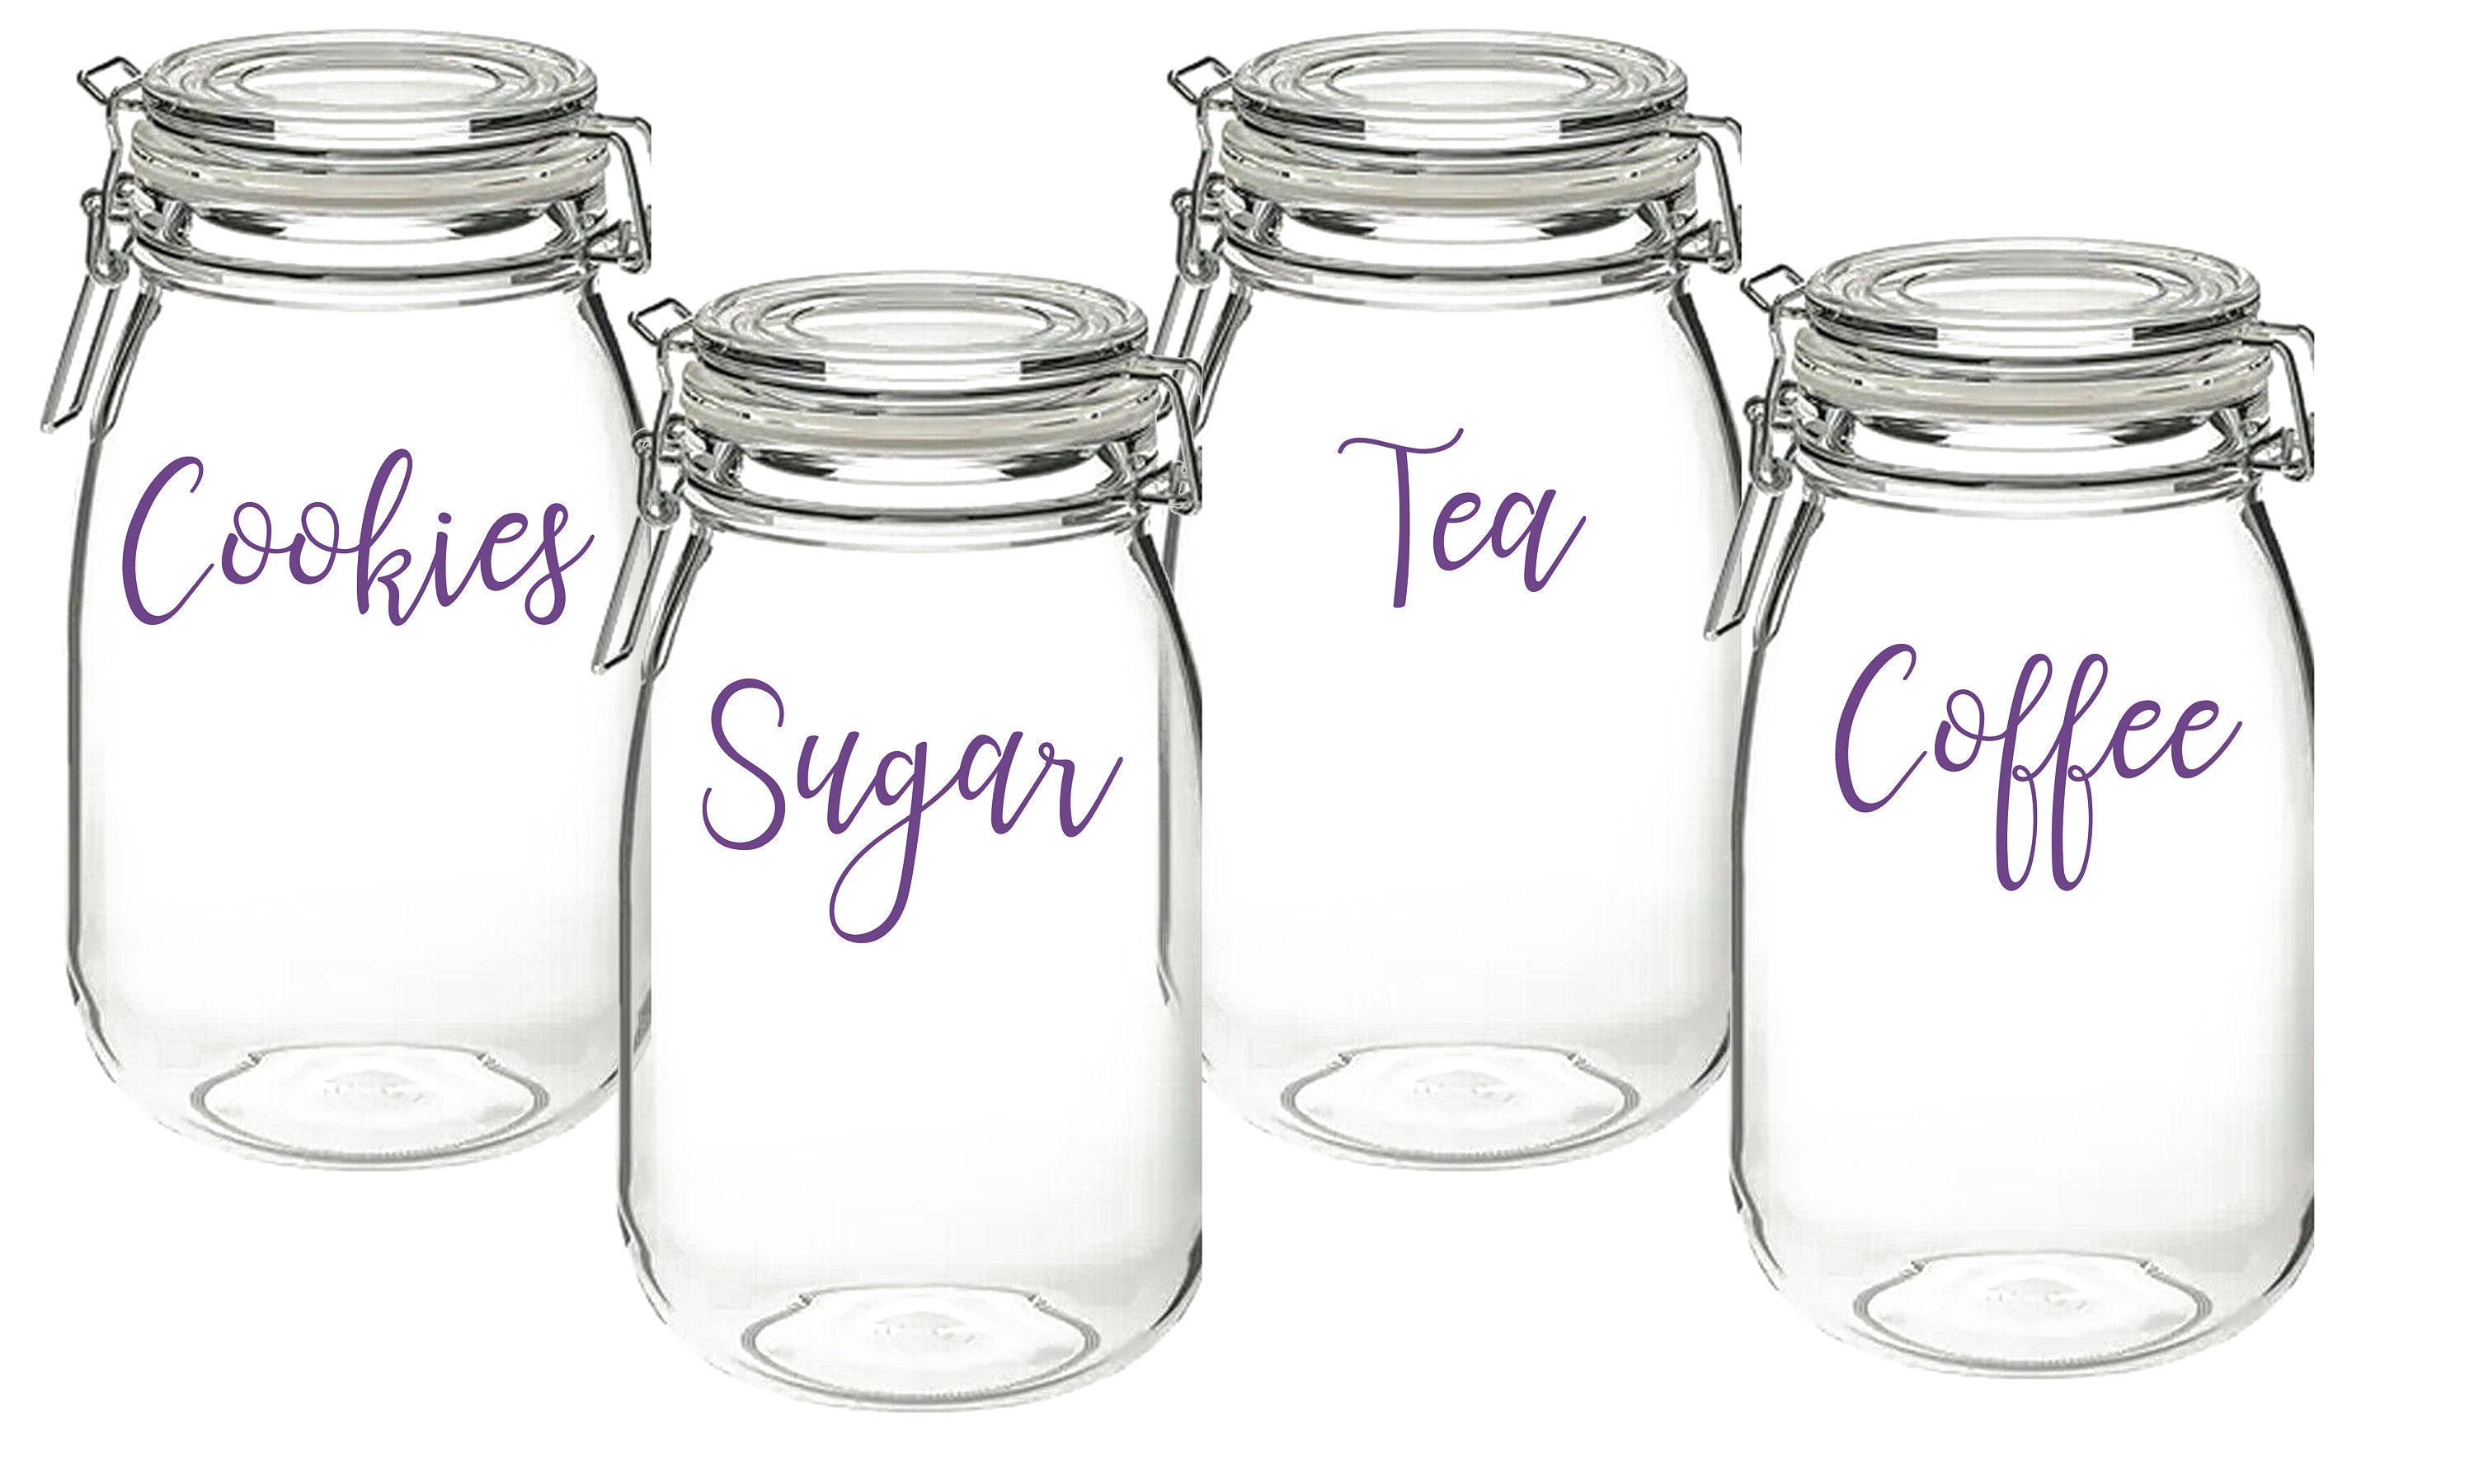 Cupboard Organisation Coffee Tea Kitchen Sugar Cookies Vinyl Sticker Decal Labels for Jars Containers Pantry 